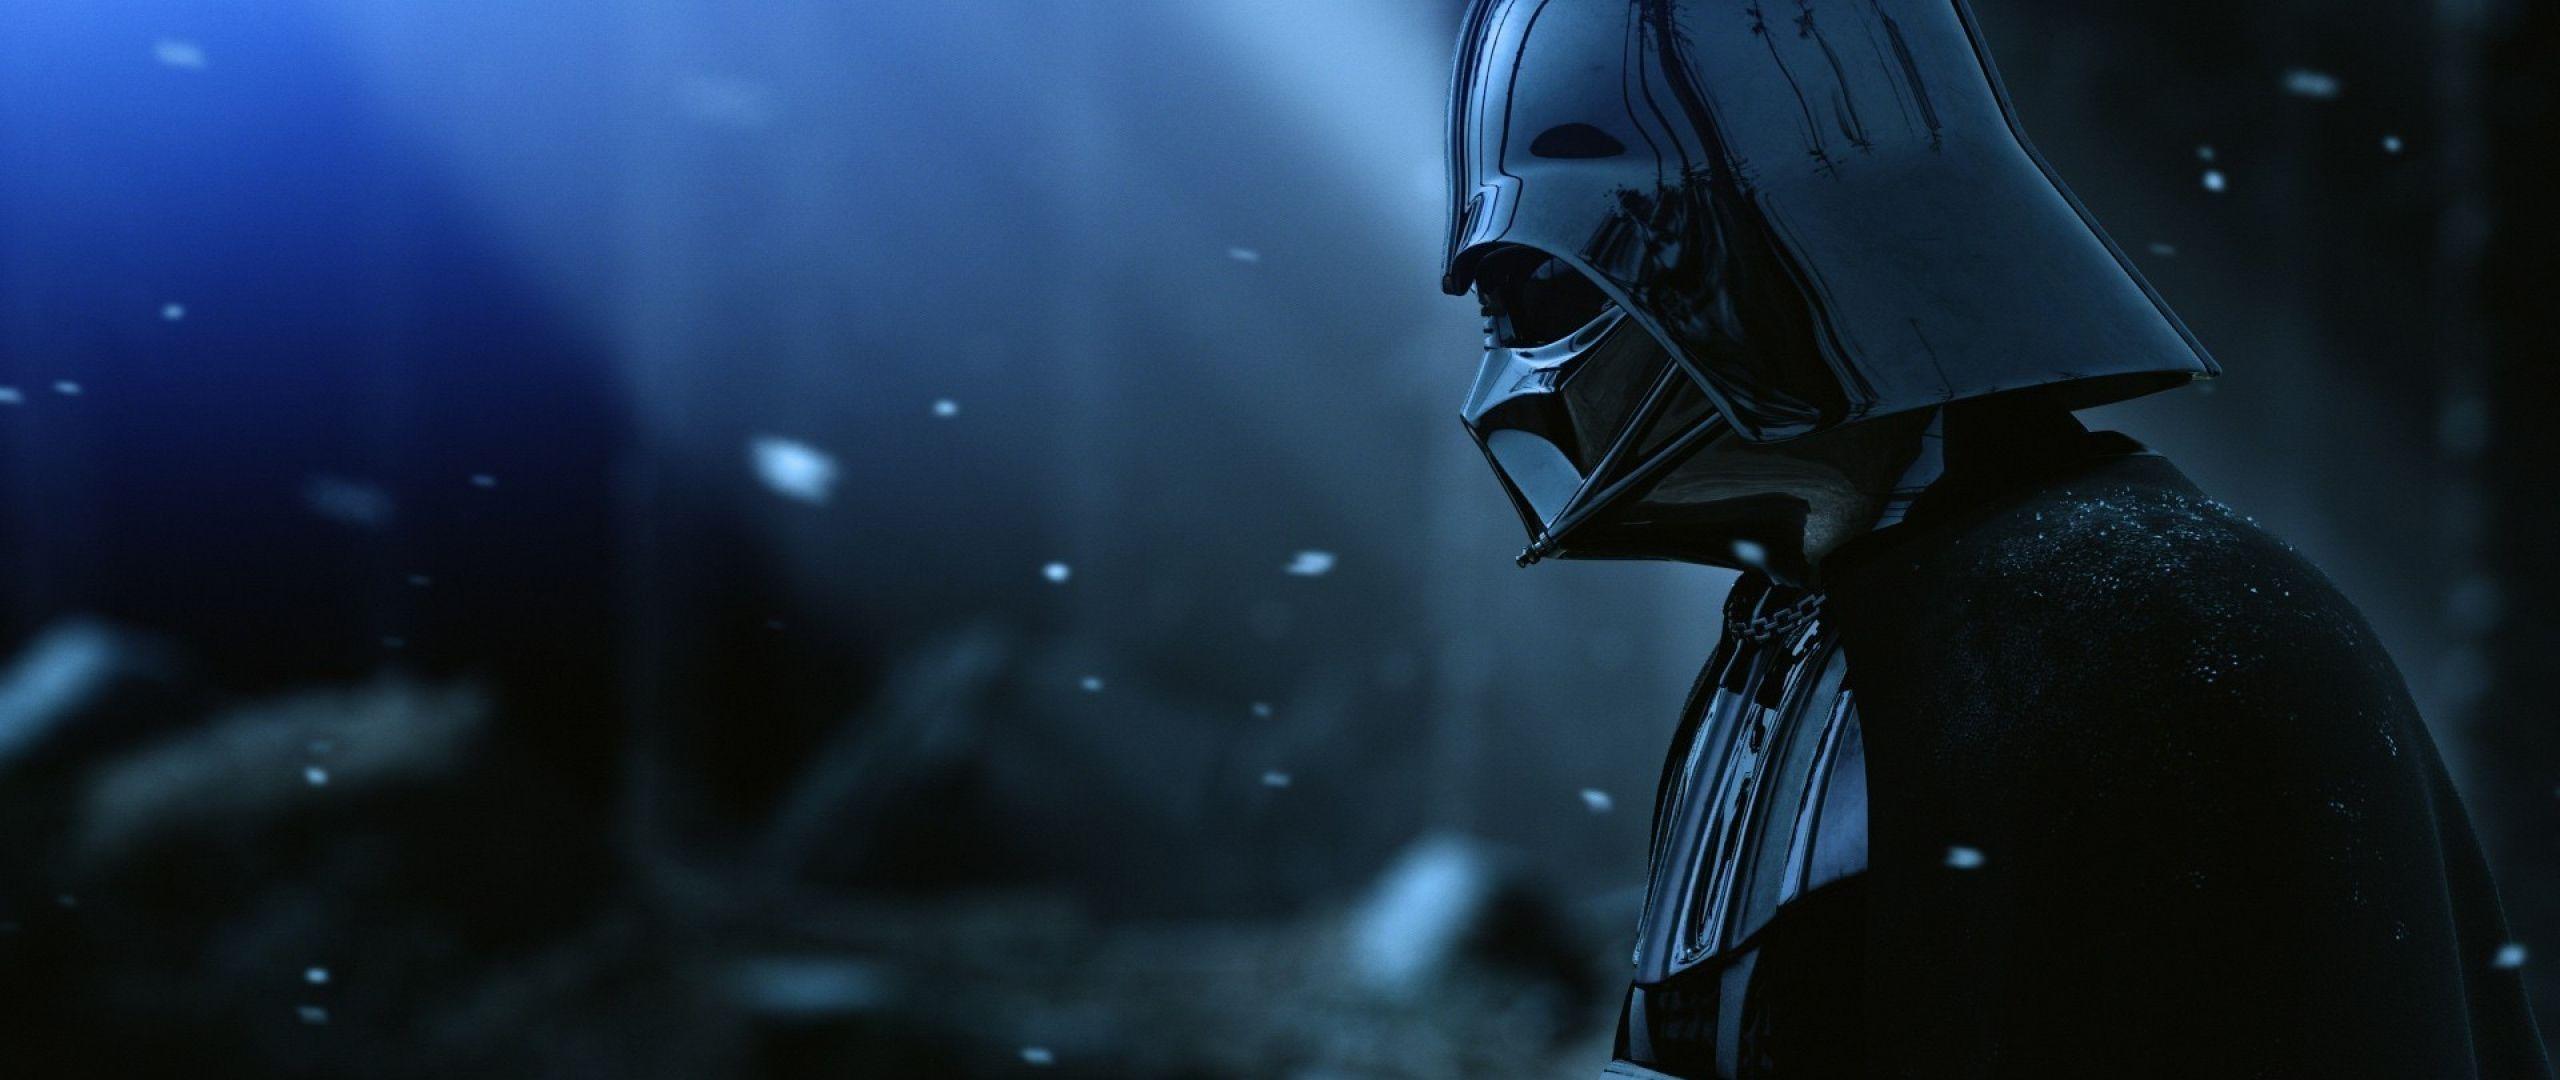 Star Wars 2560 X 1080 Wallpapers Top Free Star Wars 2560 X 1080 Backgrounds Wallpaperaccess